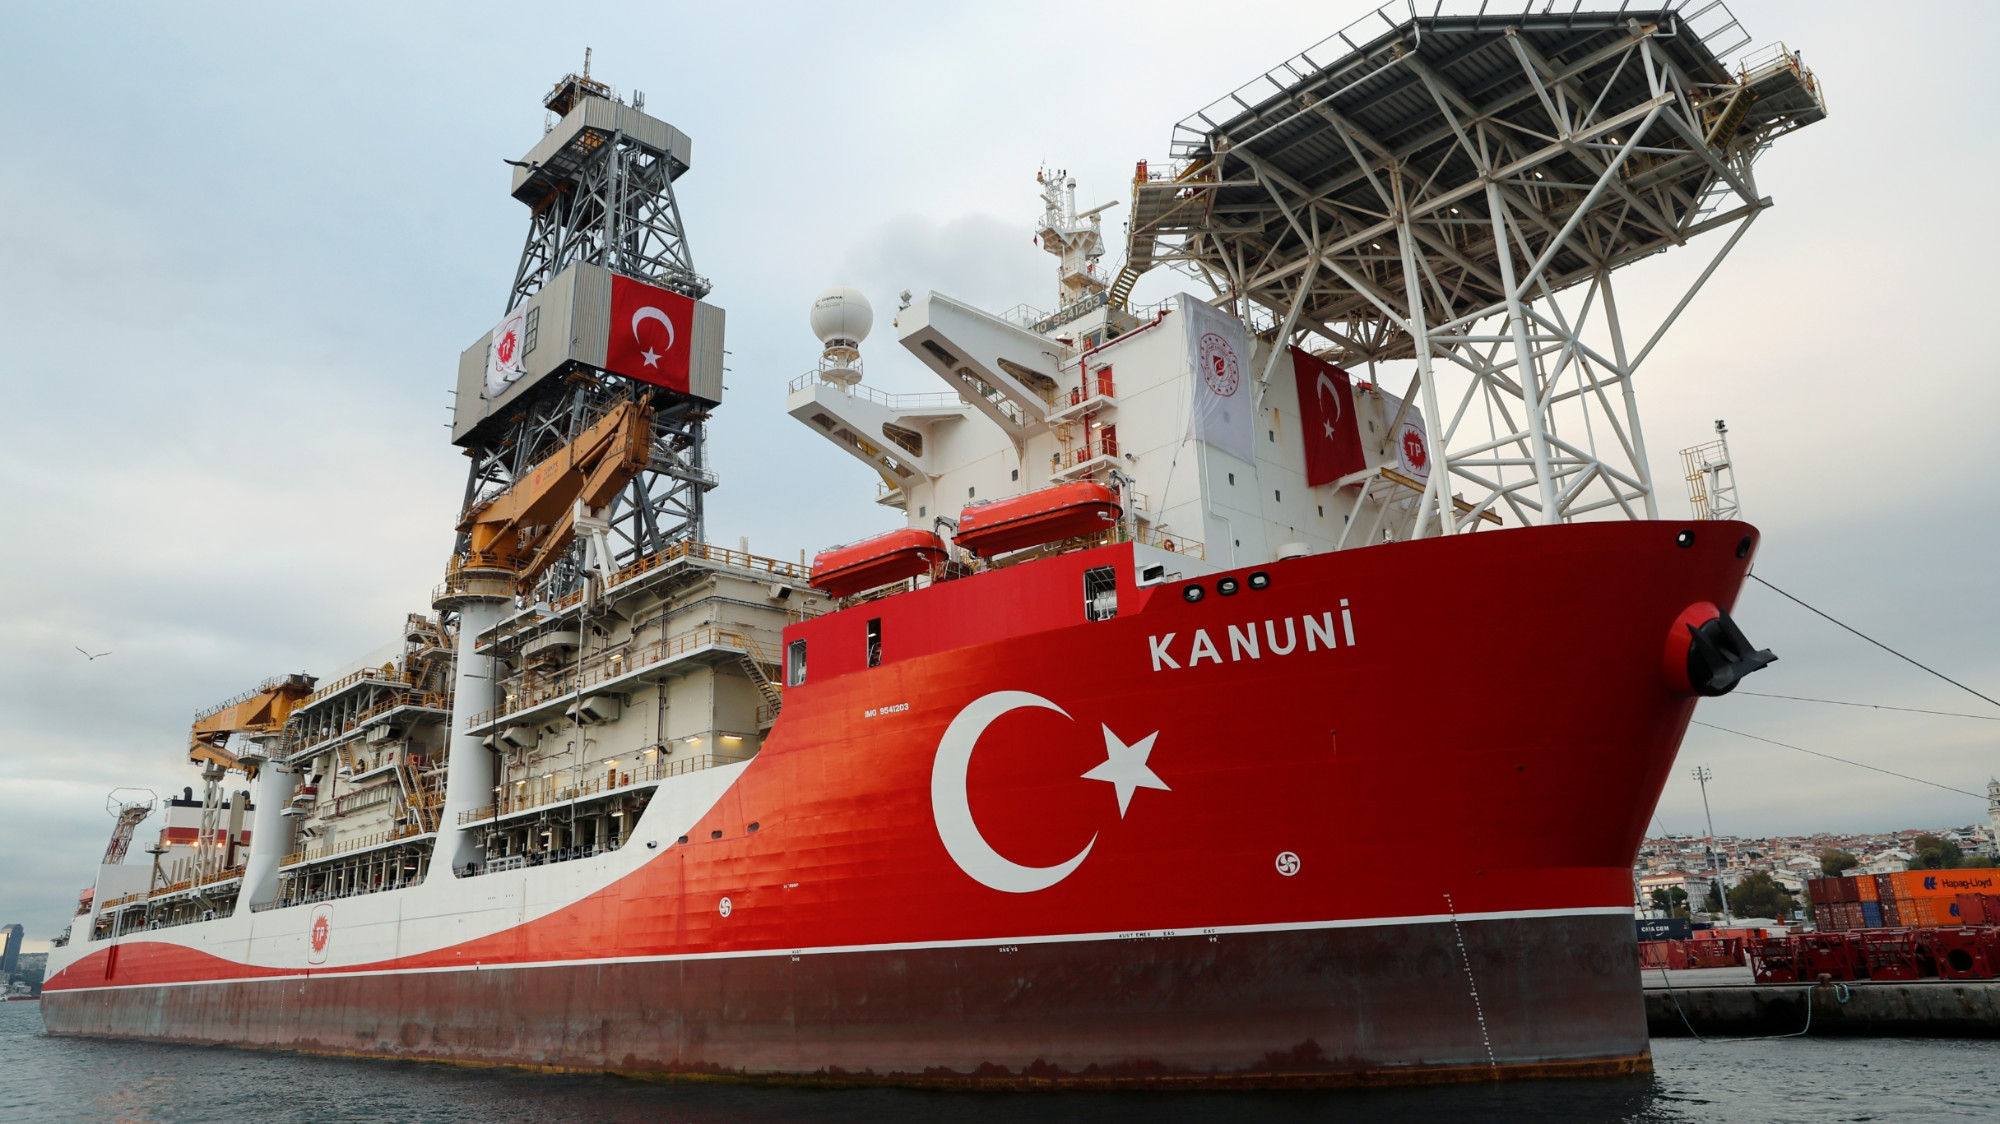 The Turkish drilling ship Kanuni is seen at the port of Haydarpasa in Istanbul, Turkey, 19 October 2020 (Reuters/Murad Sezer)